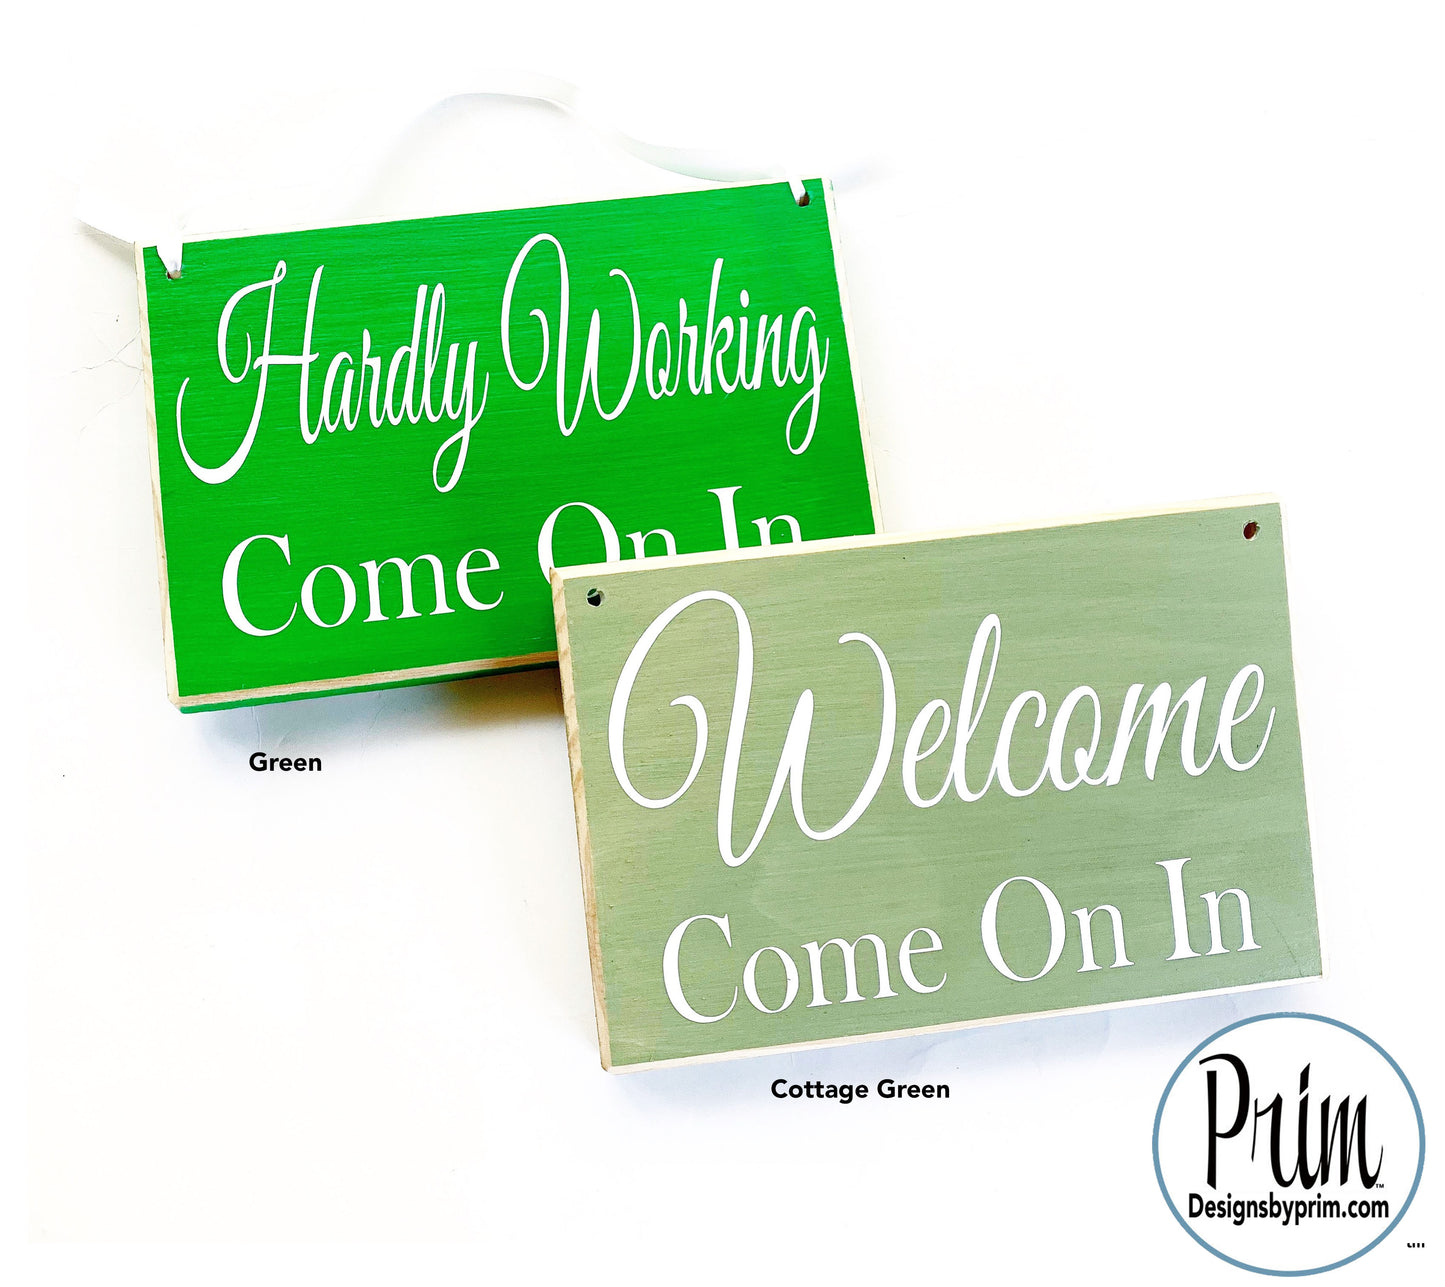 Designs by Prim Cottage Green Custom Wood Sign Color Chart